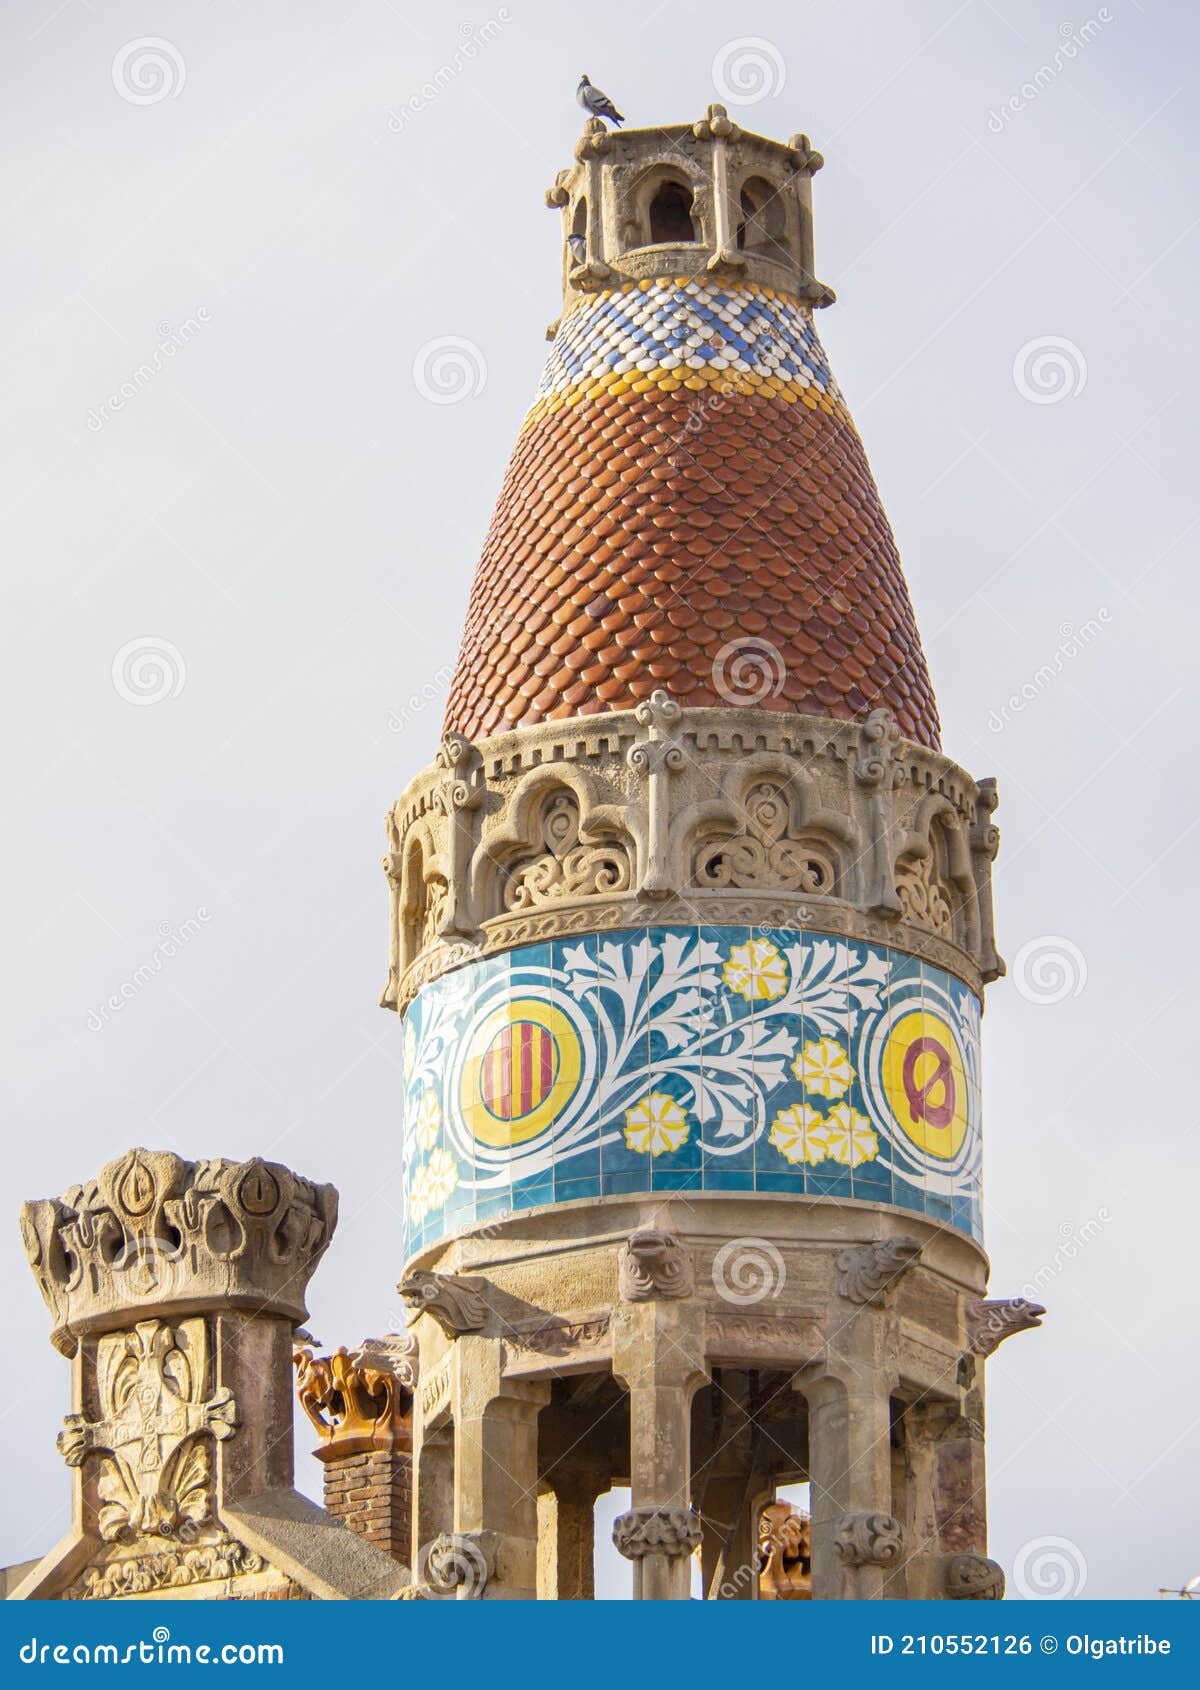 detail of a dome column in sant pau hospital in barcelona, a modernism architecture.